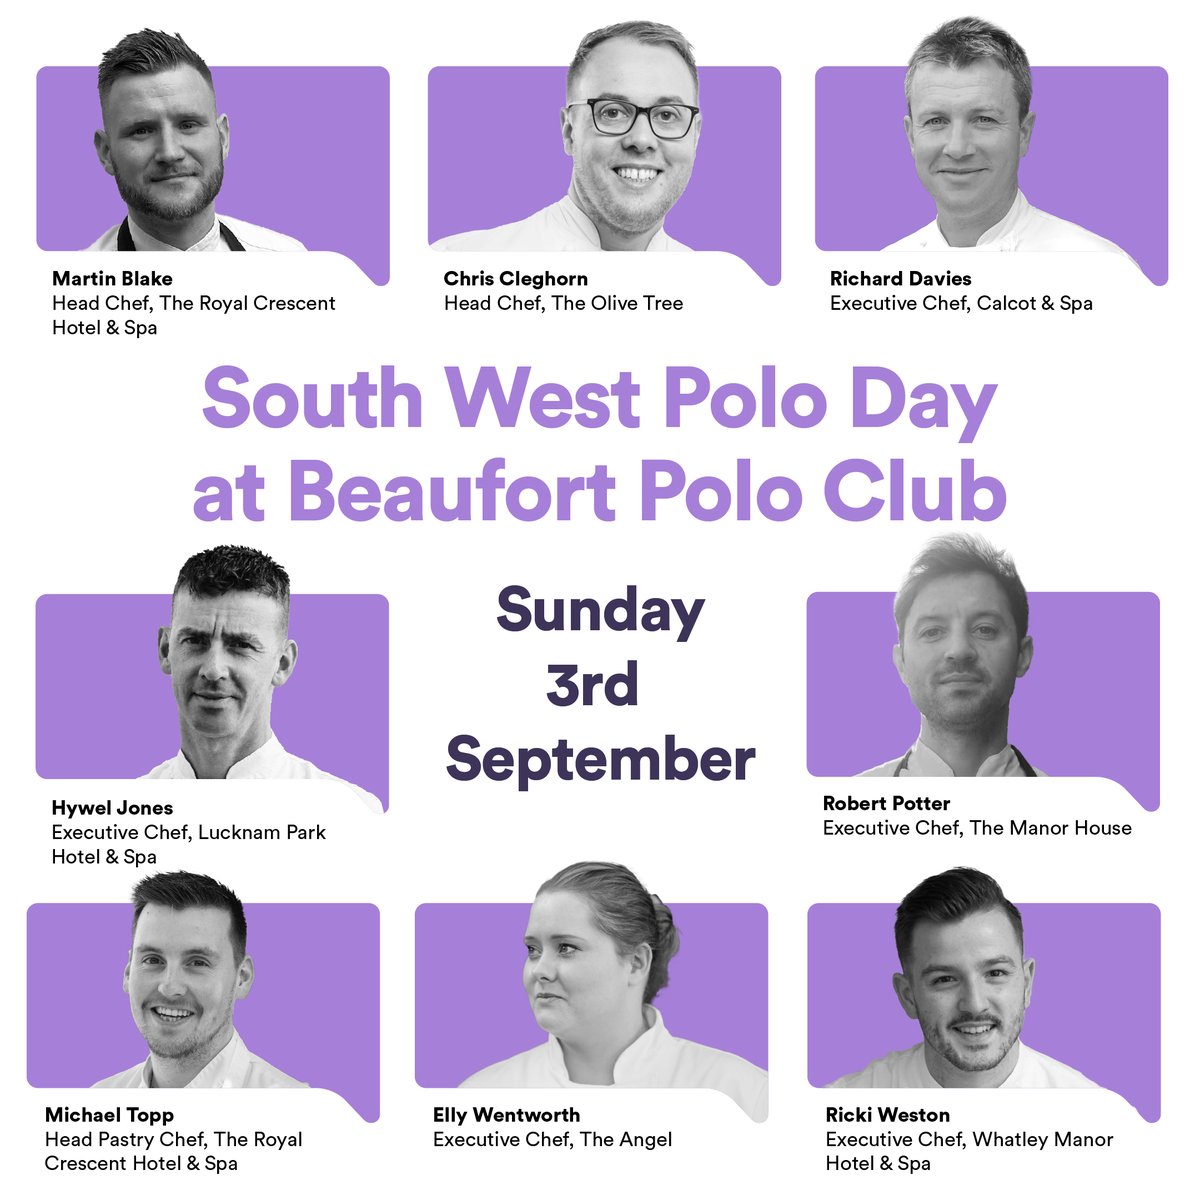 Our flagship Polo Day makes its long-awaited return to @BeaufortPolo this autumn. 8 award-winning chefs led by #MichelinStar @HywelJonesLP of @LucknamPark will create the day's dazzling luncheon & afternoon cream tea. Read all about it & book your places: ow.ly/GTGv50NKqiS